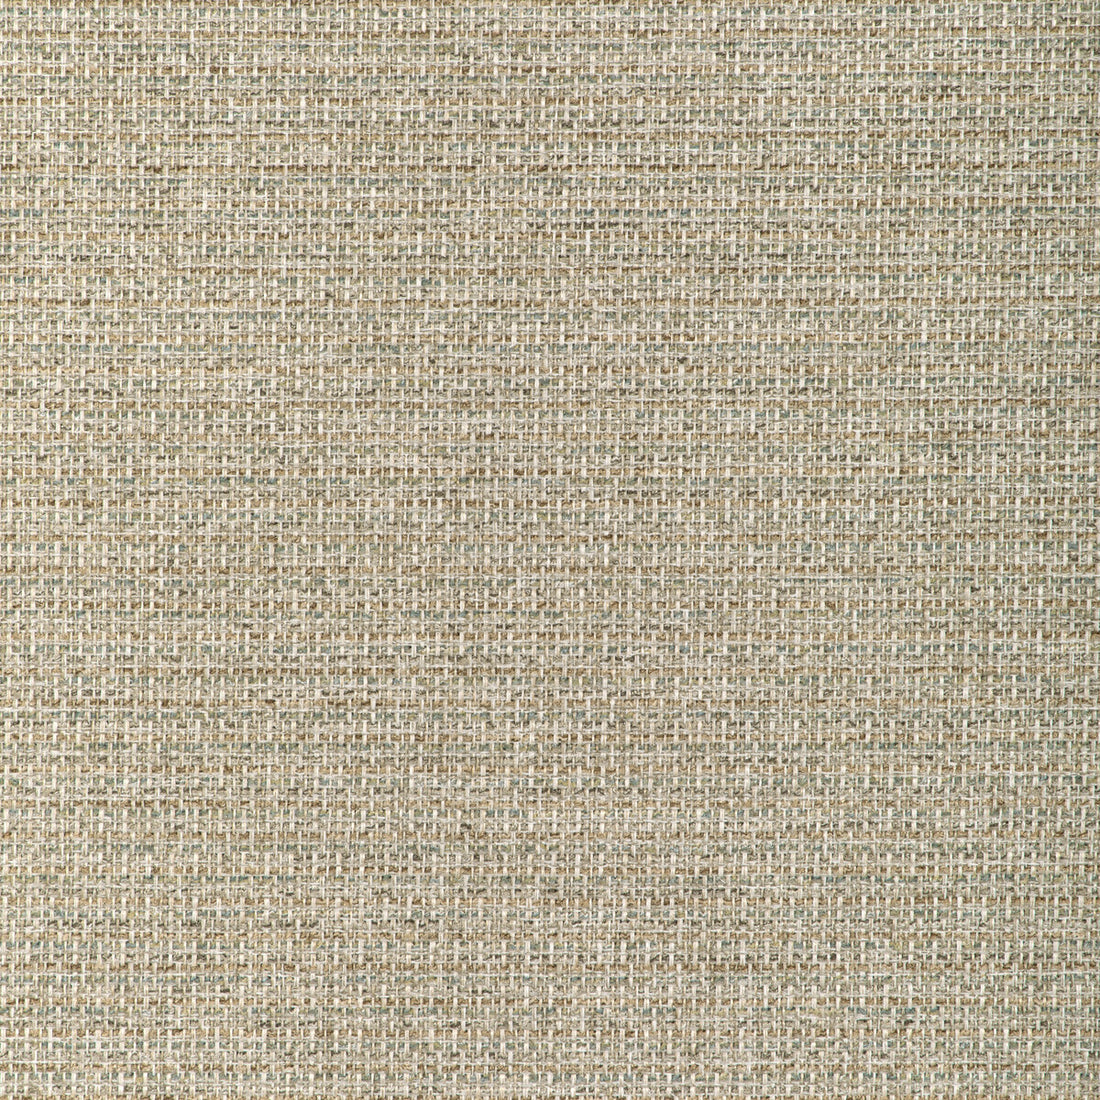 Kravet Design fabric in 37200-54 color - pattern 37200.54.0 - by Kravet Design in the Woven Colors collection